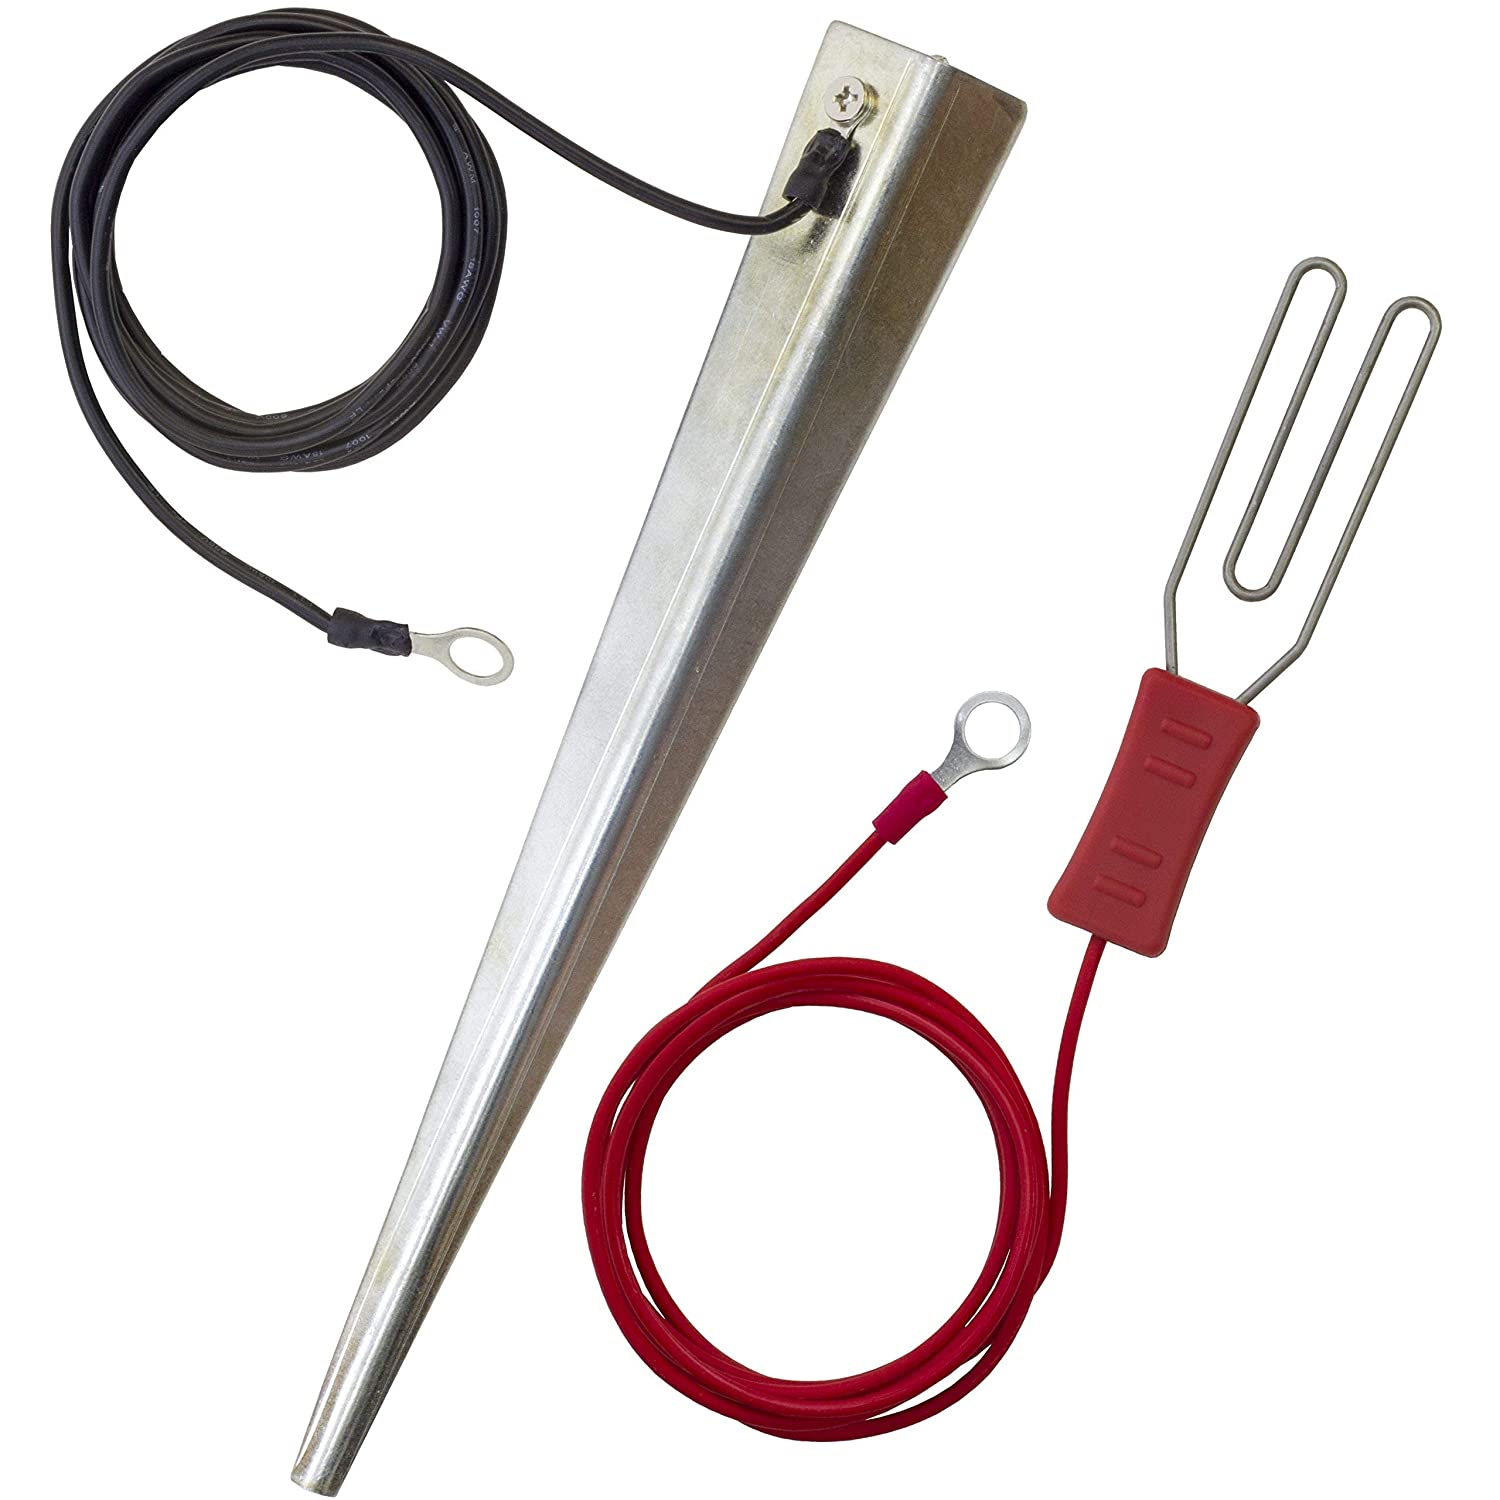 Electric Fence Stake and Leads Kit | X-Stop